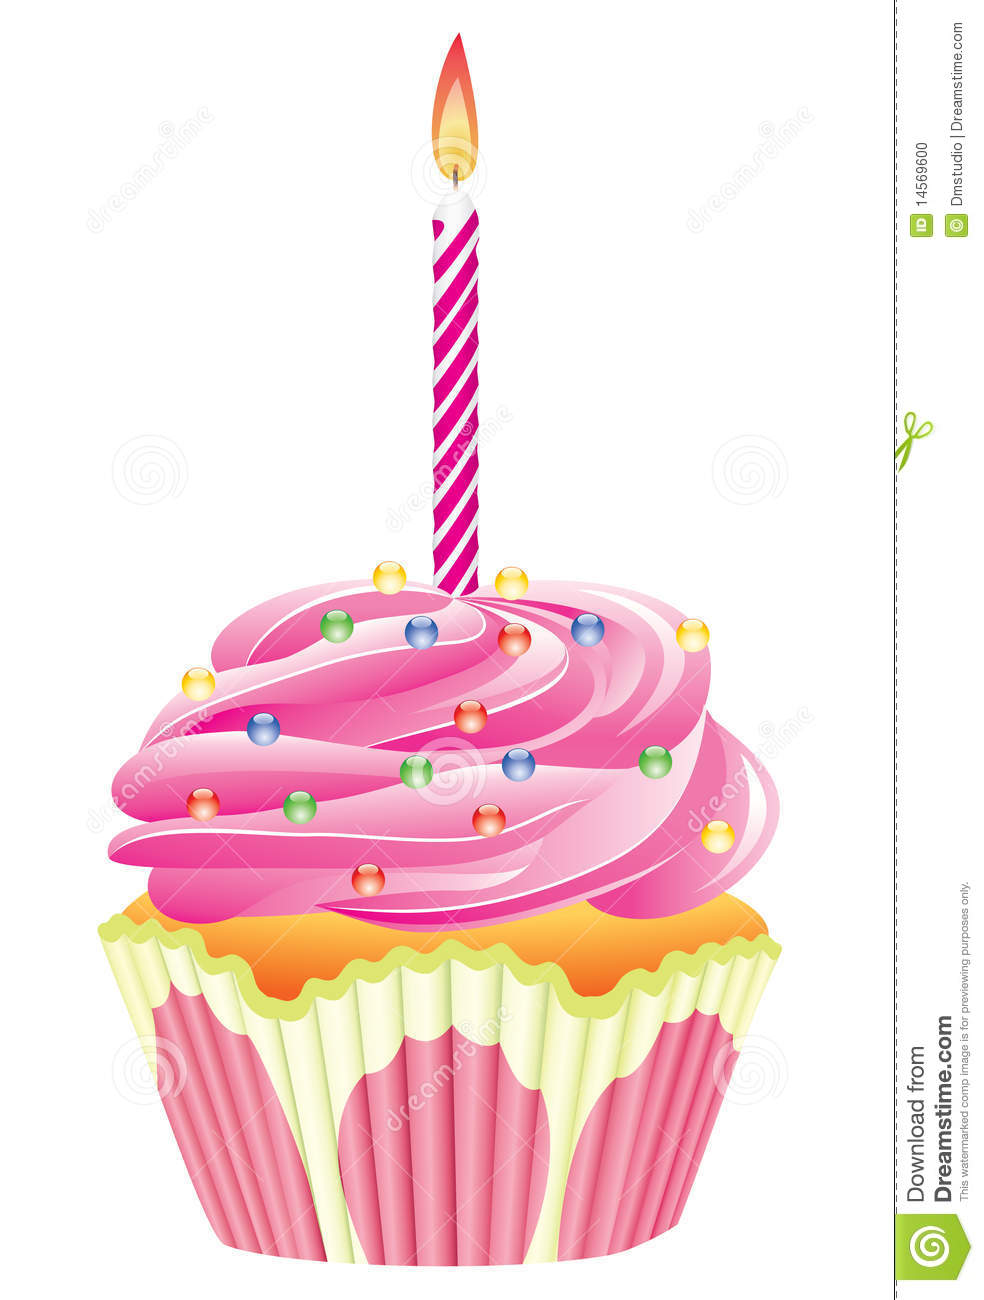 Animated Candle Clipart Cupcake With Burning Candle